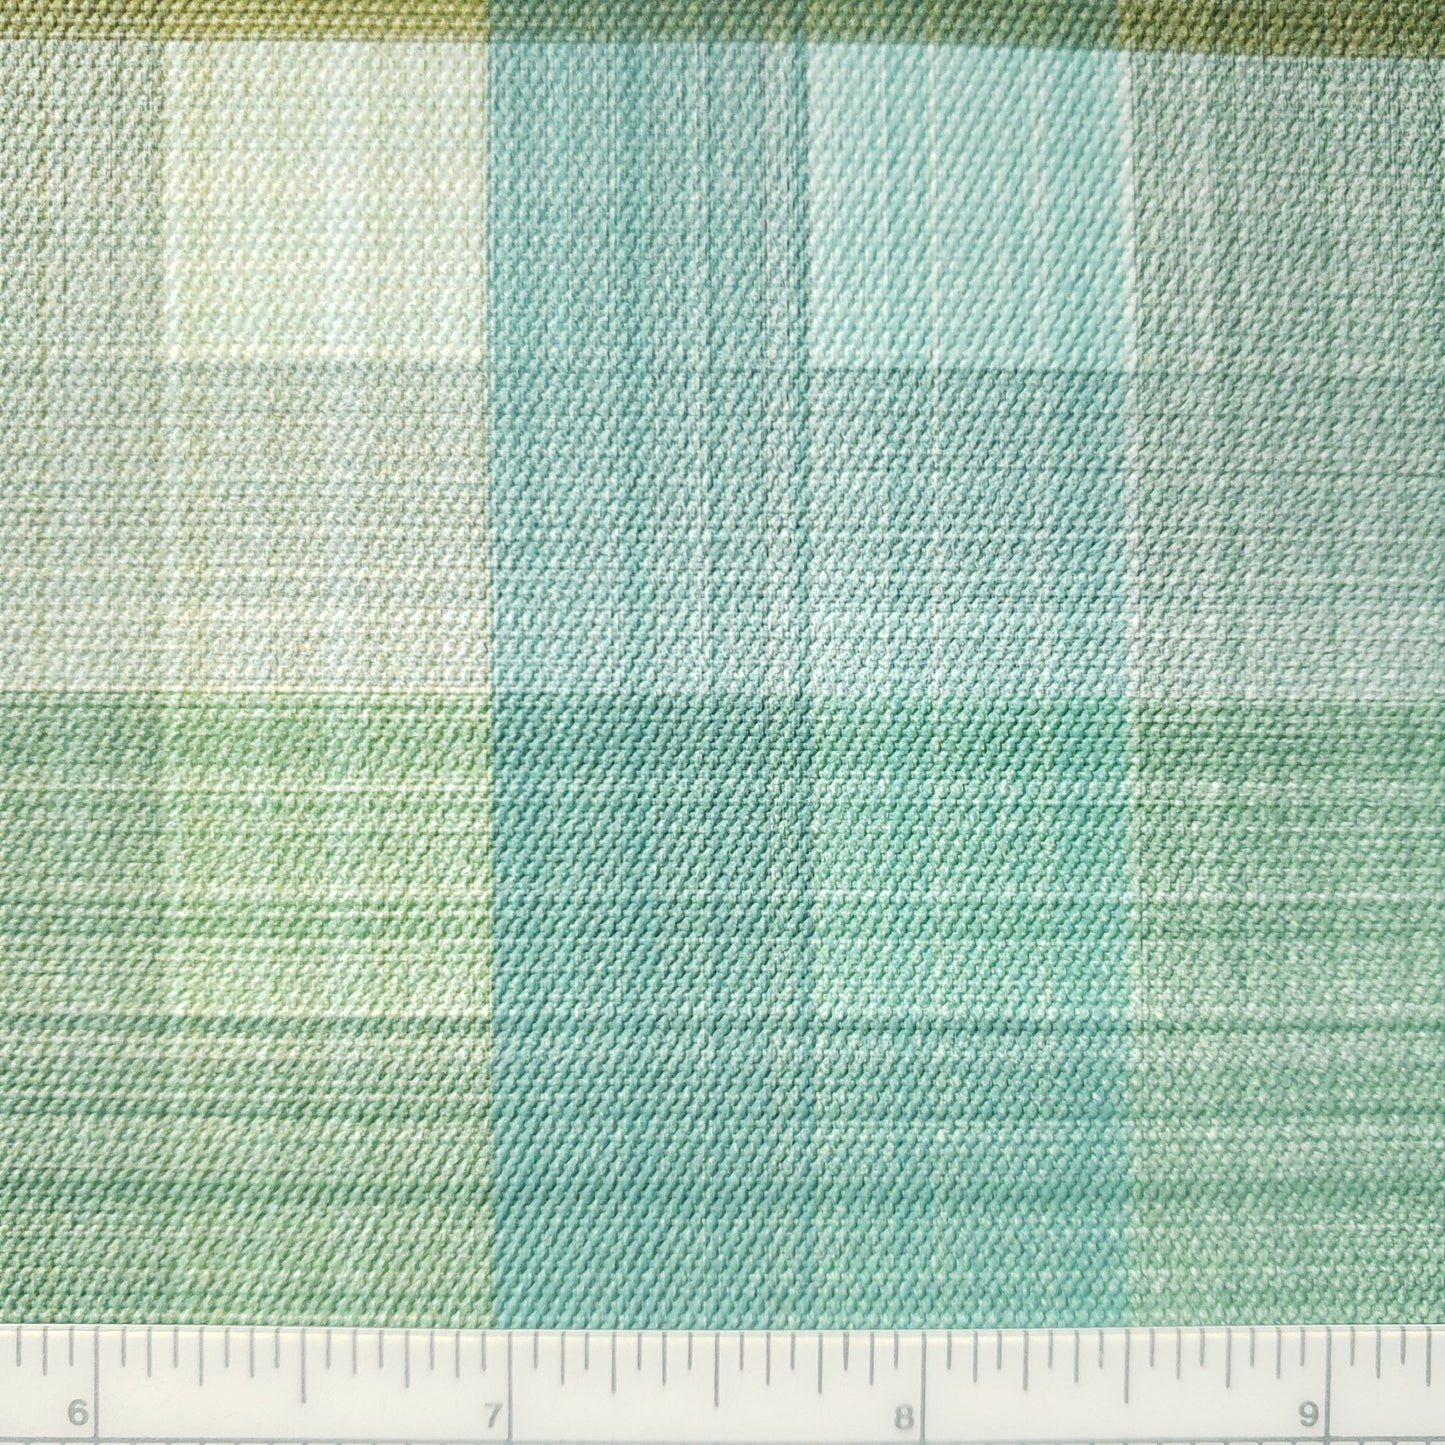 Grass Stain Plaid Patterned Vinyl